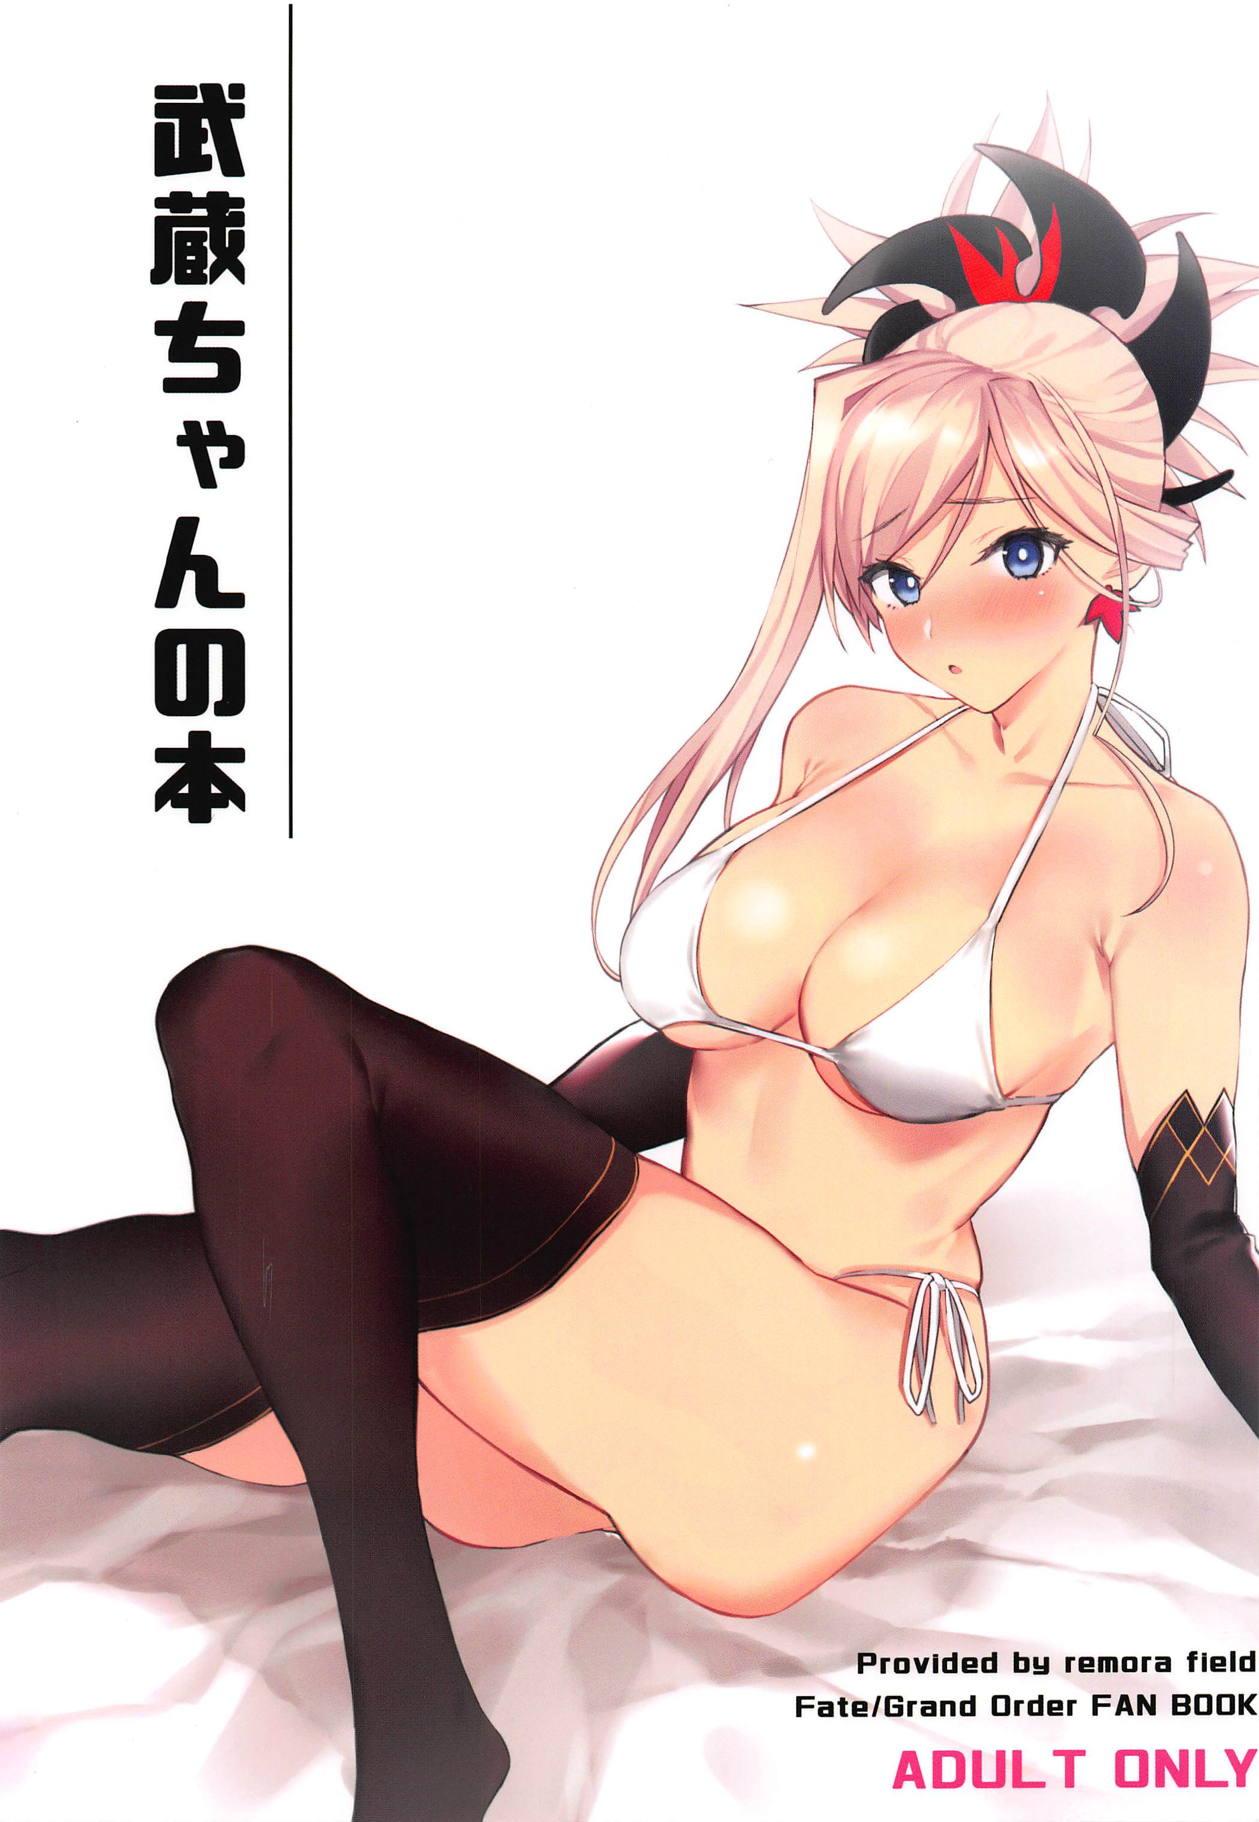 Whooty Musashi-chan no Hon - Fate grand order Gemendo - Picture 1